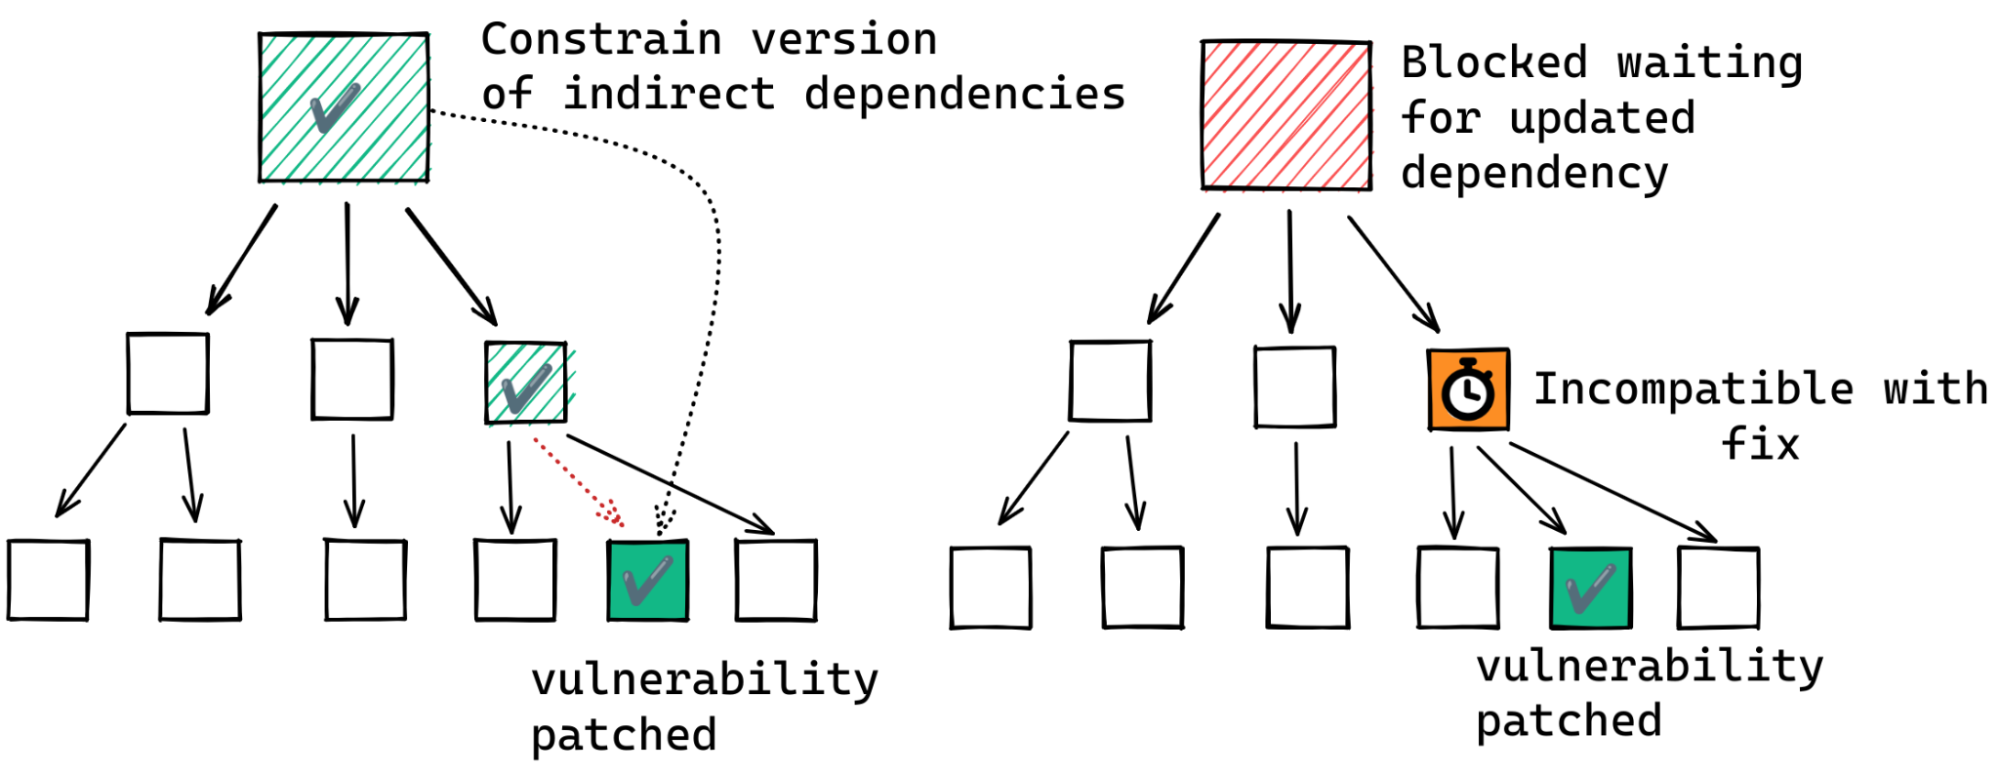 An indirect dependency can often have its version pinned, but incompatibile intermediate dependencies may be a problem. 